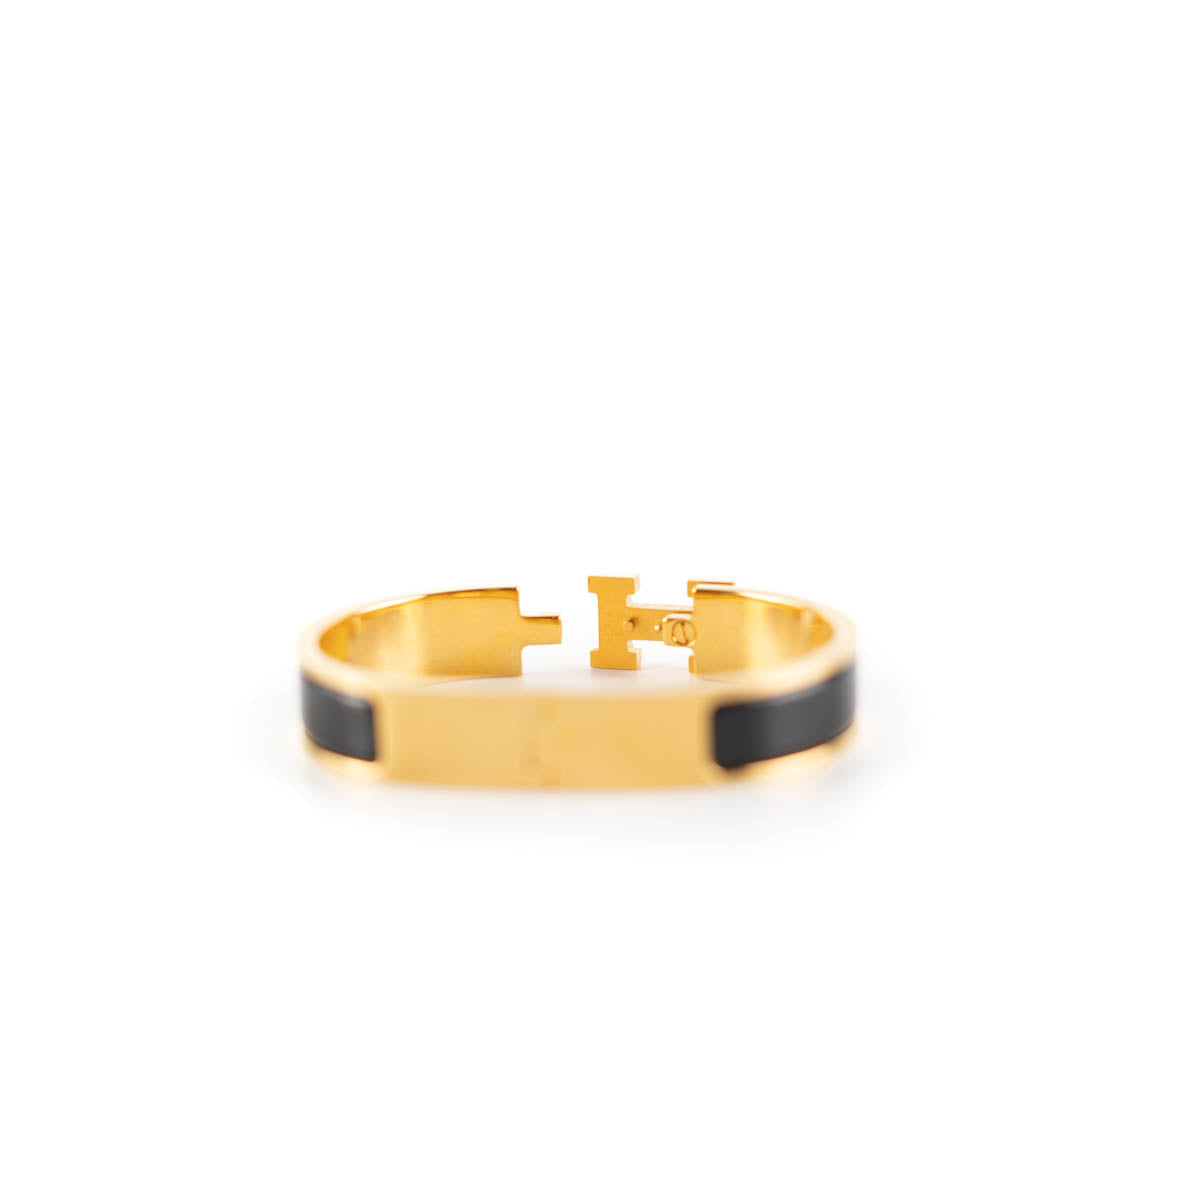 Hermes Clic H Bracelet, Black, 【Inventory Required Check】 PM